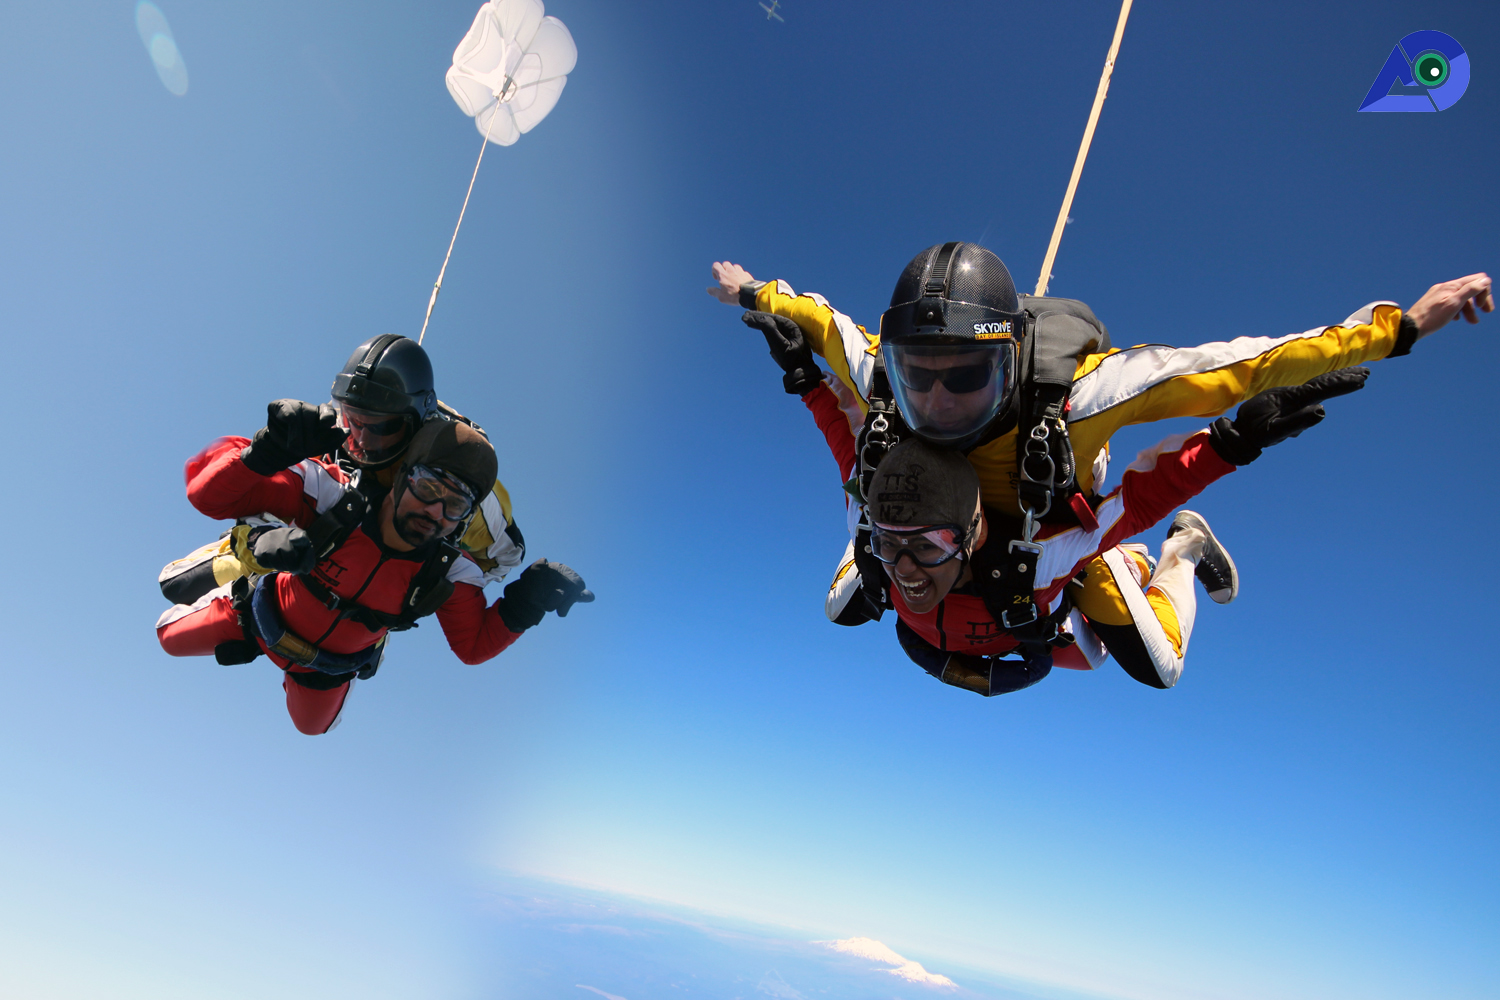 We Skydived With Taupo Tandem Skydiving & It Was Incredible